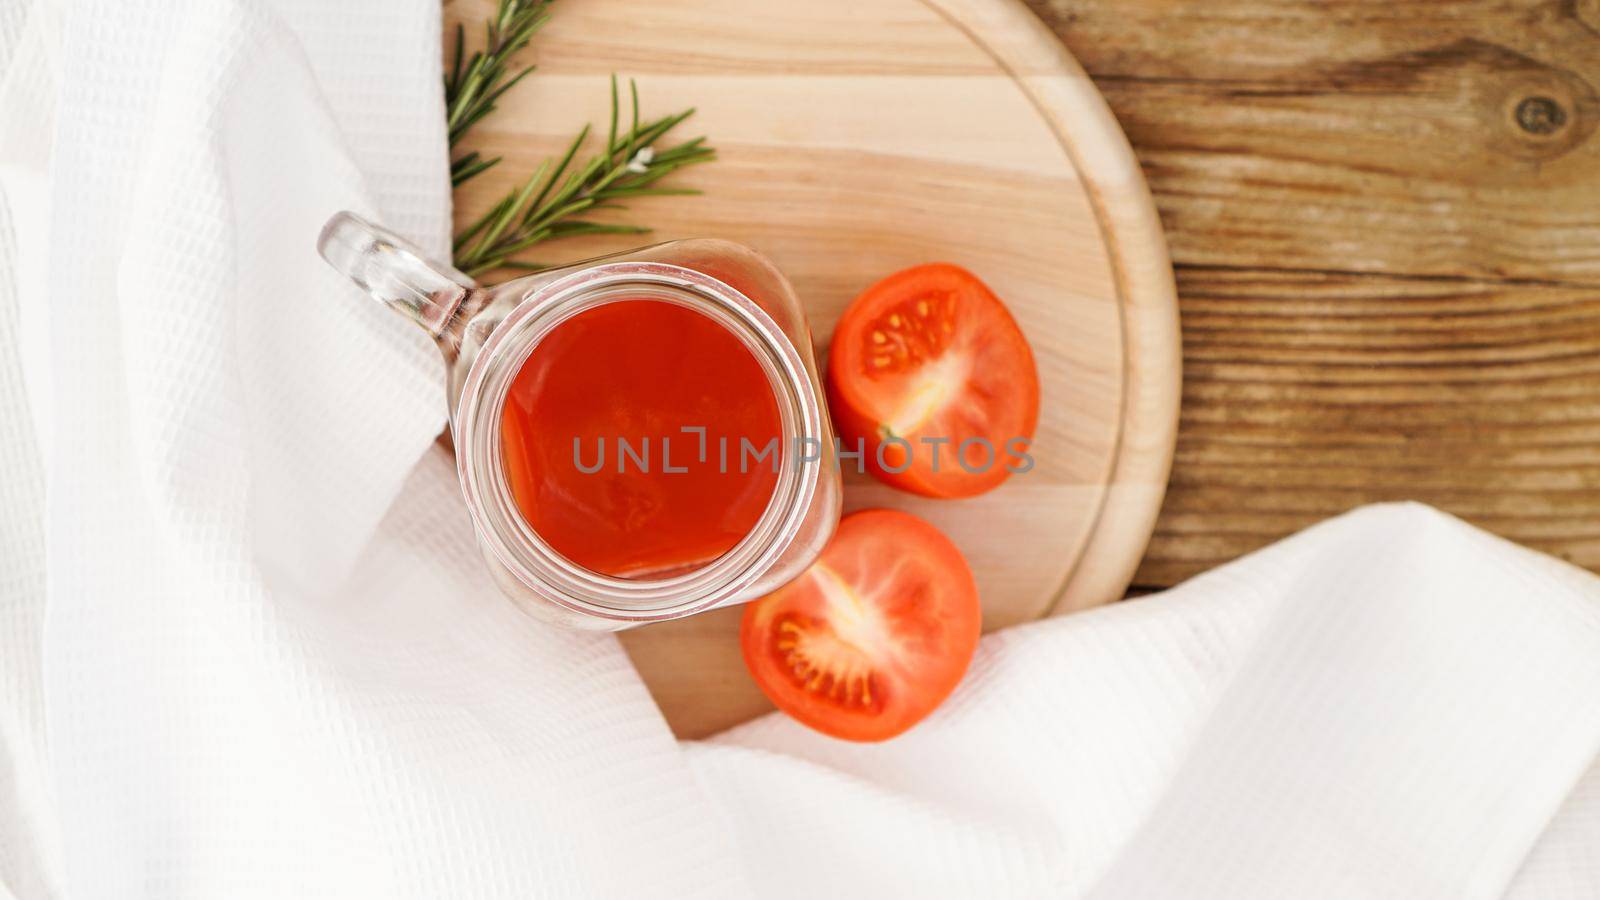 Tomato juice in glass jar, fresh tomatoes and sprigs of rosemary on wooden cutting board and white towel - Top view